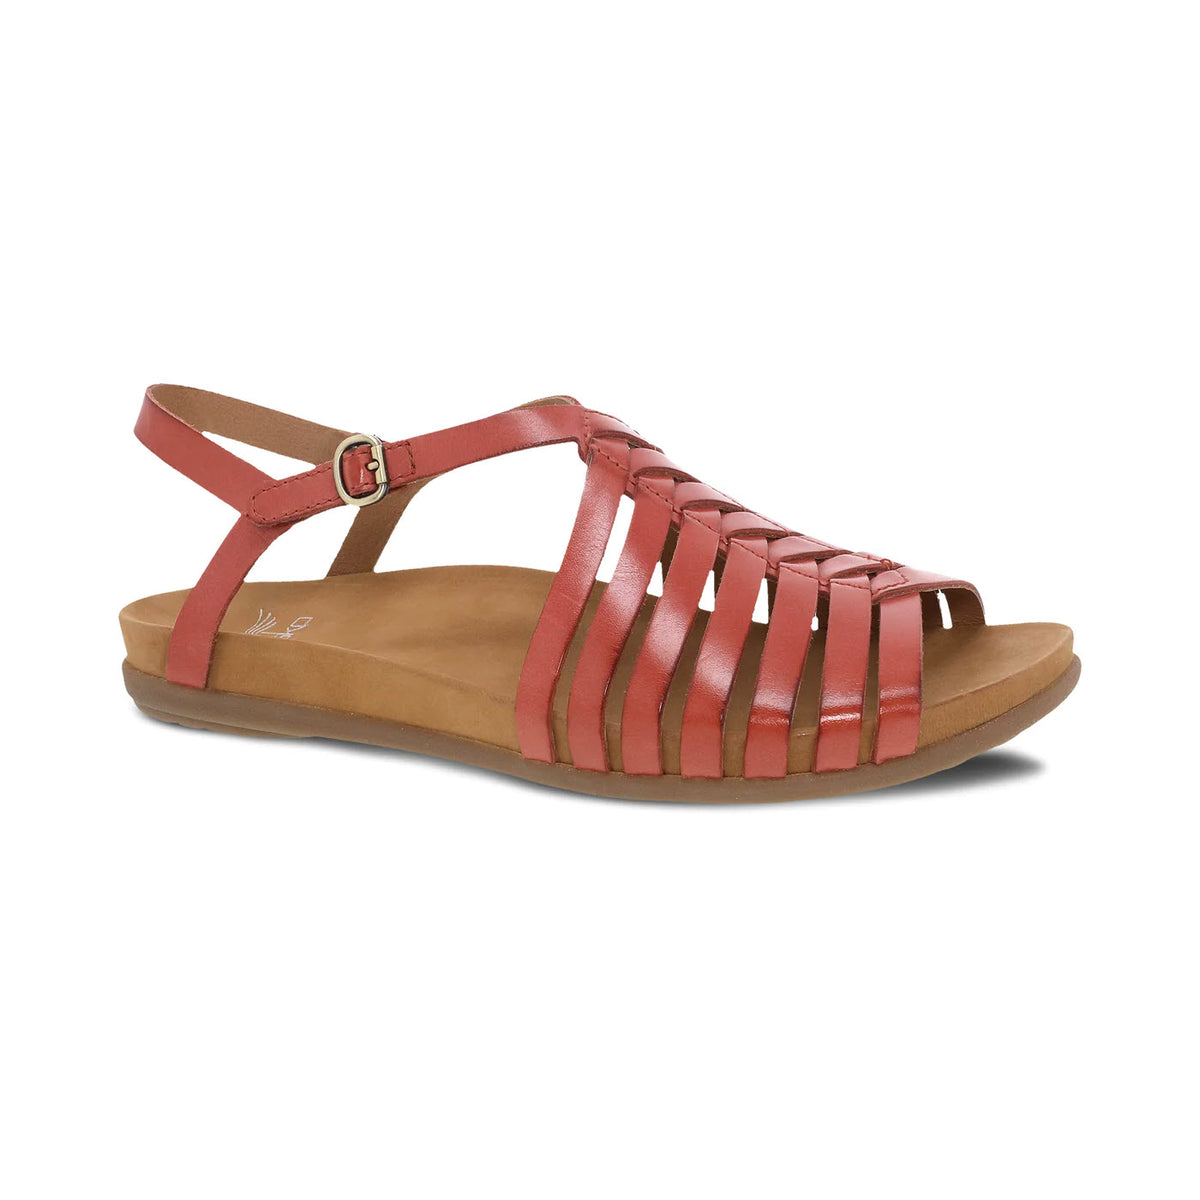 Dansko Jennifer Clay - Womens sandal with a buckle closure and a cushioned sole, isolated on a white background.